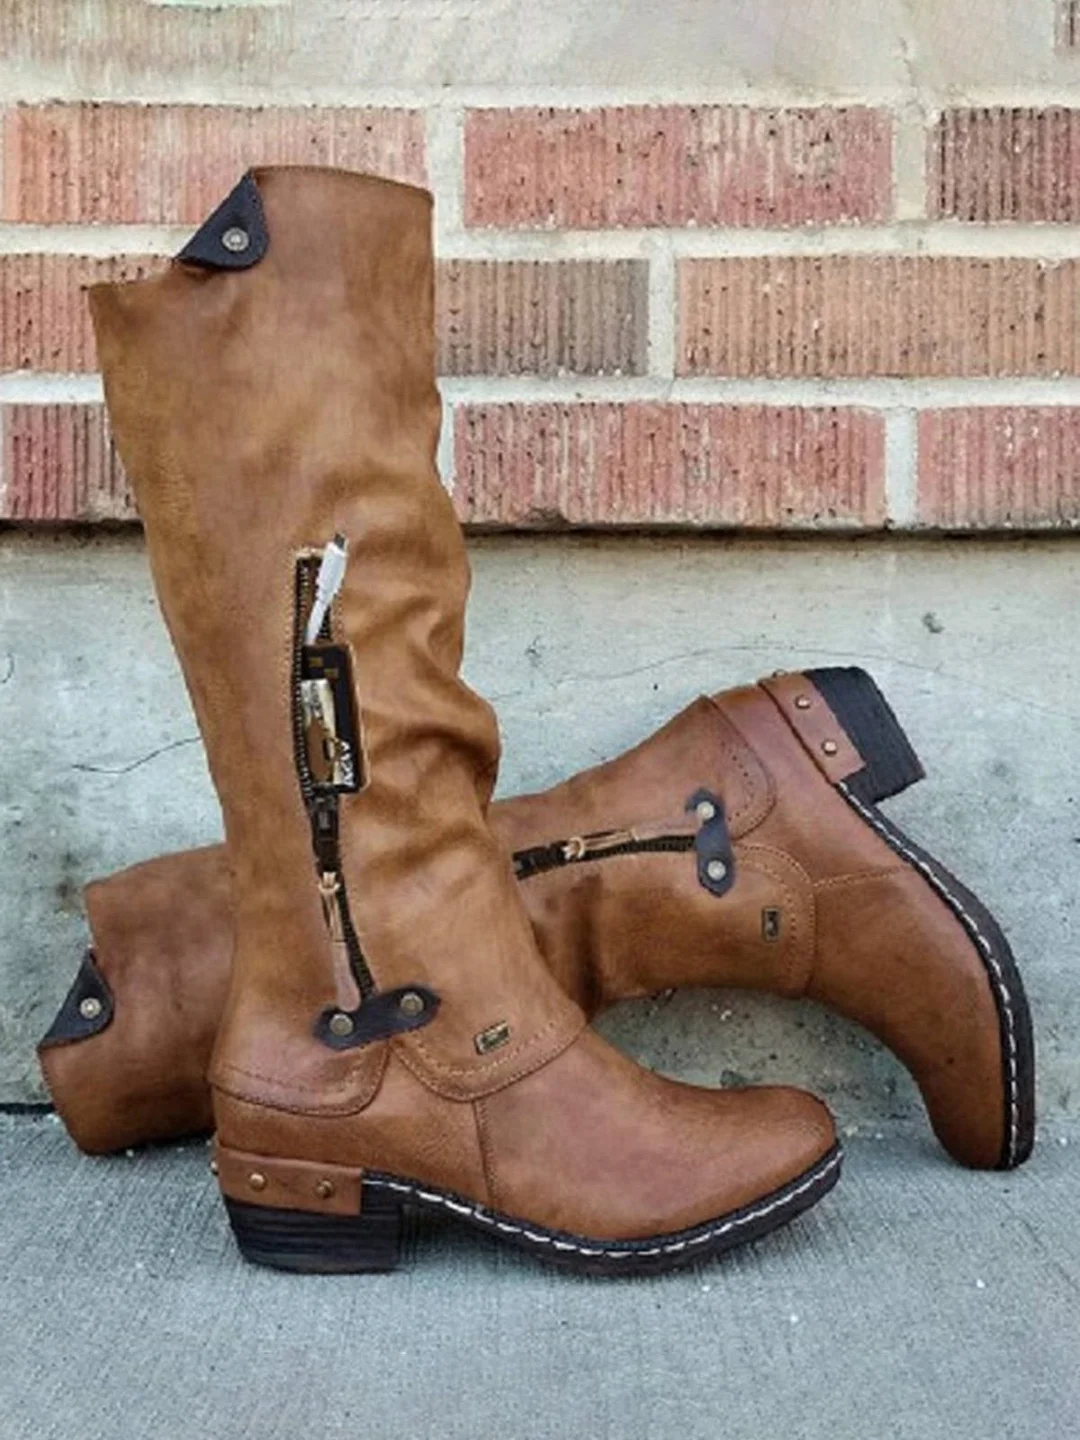 Vintage Casual Pleated Zip Riding Boots | IFYHOME